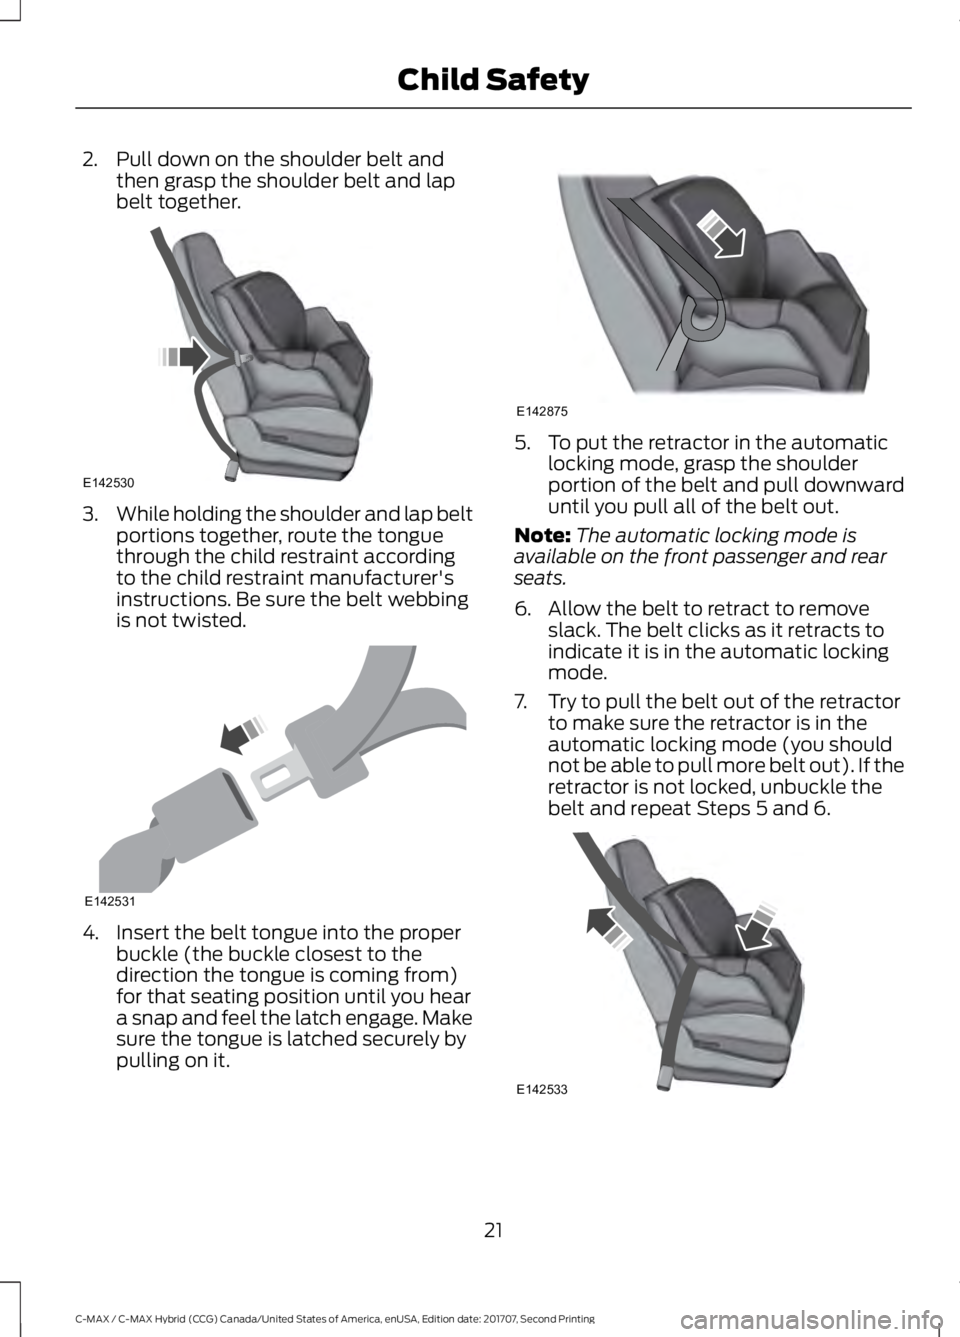 FORD C-MAY HYBRID 2018  Owners Manual 2. Pull down on the shoulder belt and
then grasp the shoulder belt and lap
belt together. 3.
While holding the shoulder and lap belt
portions together, route the tongue
through the child restraint acc